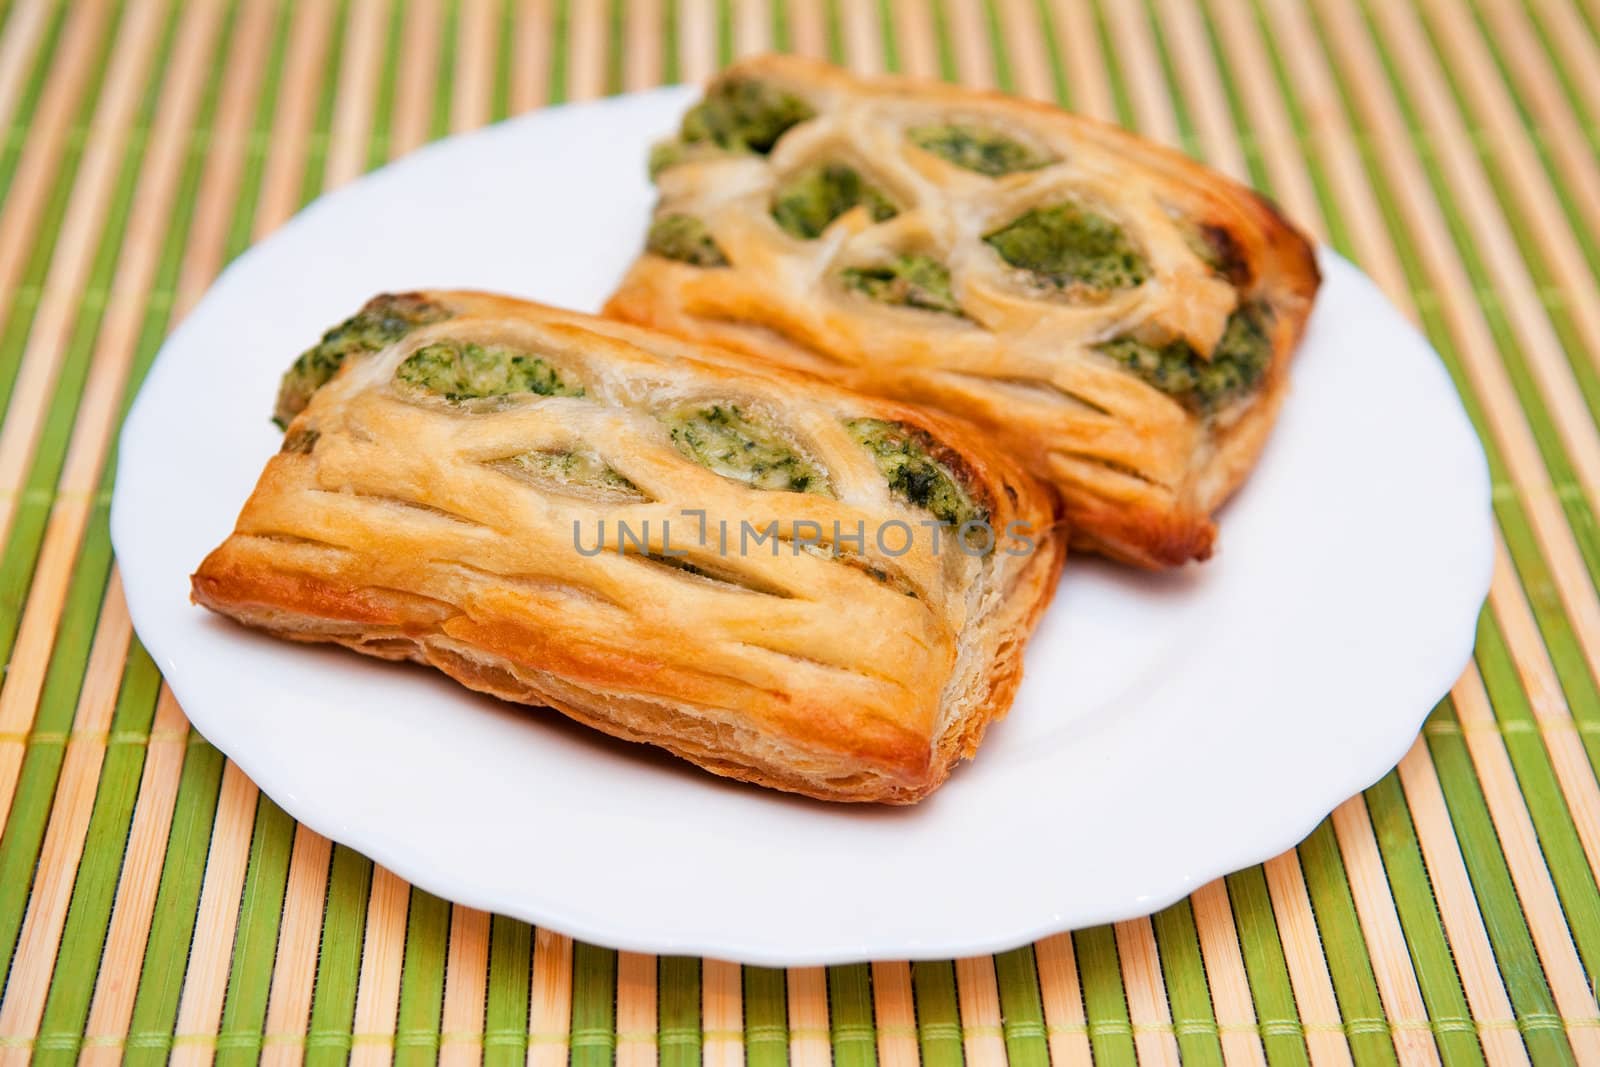 Two snacks made of french pastry and spinach